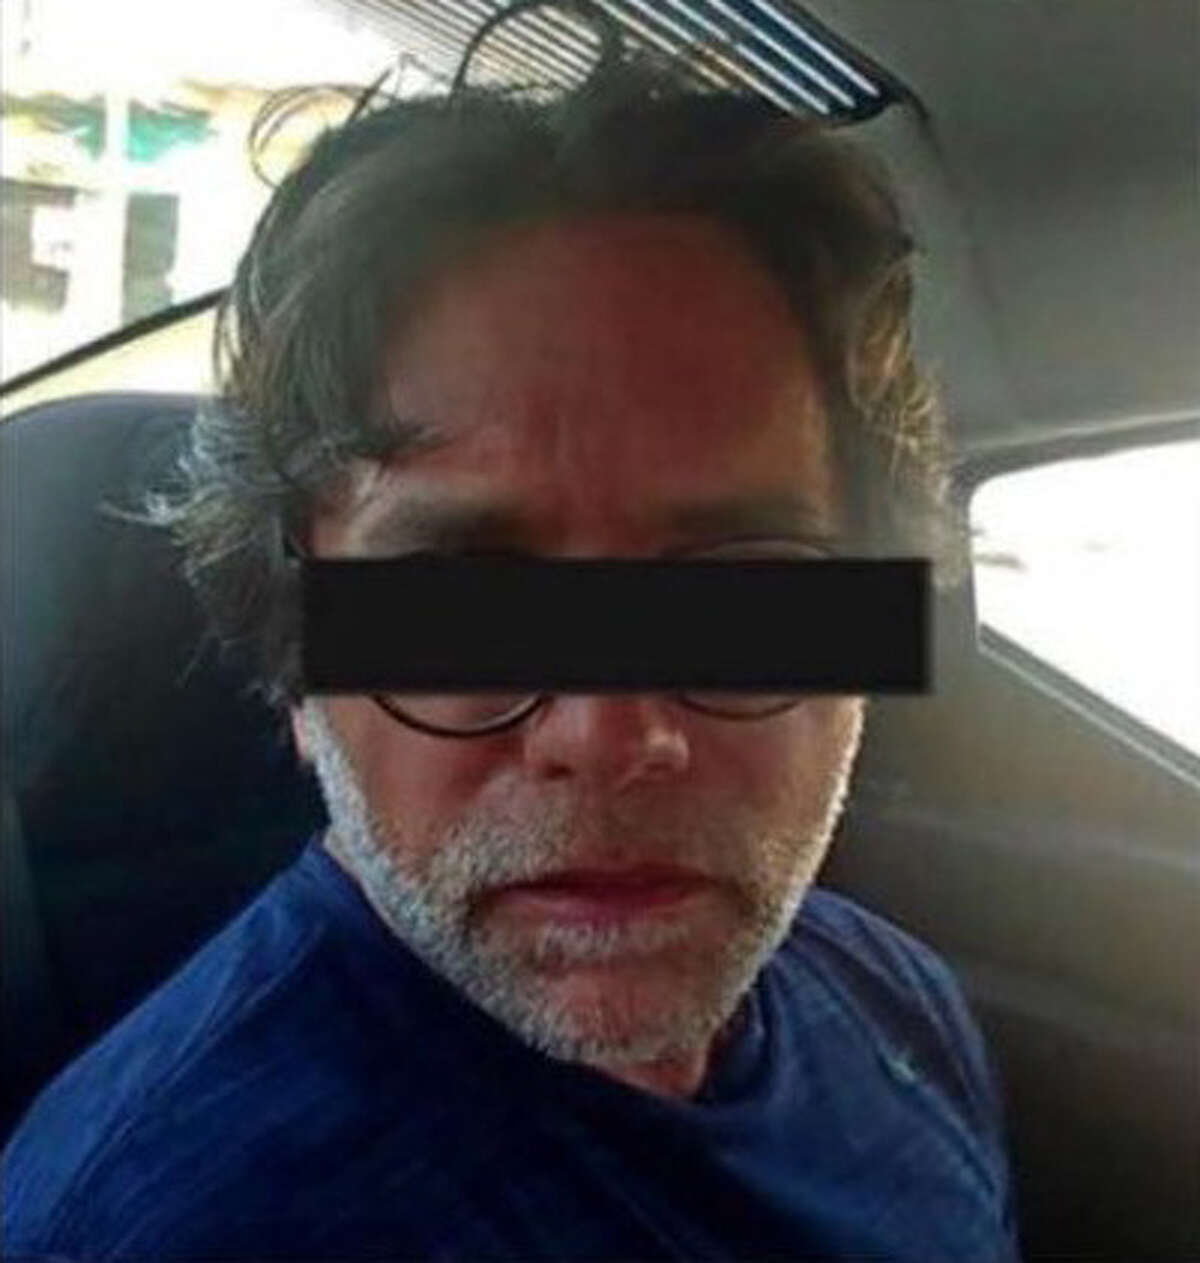 Keith Raniere in a police car after being arrested Sunday, March 15, 2018, in Mexico. (Photo courtesy Frank Parlato/ArtVoice)